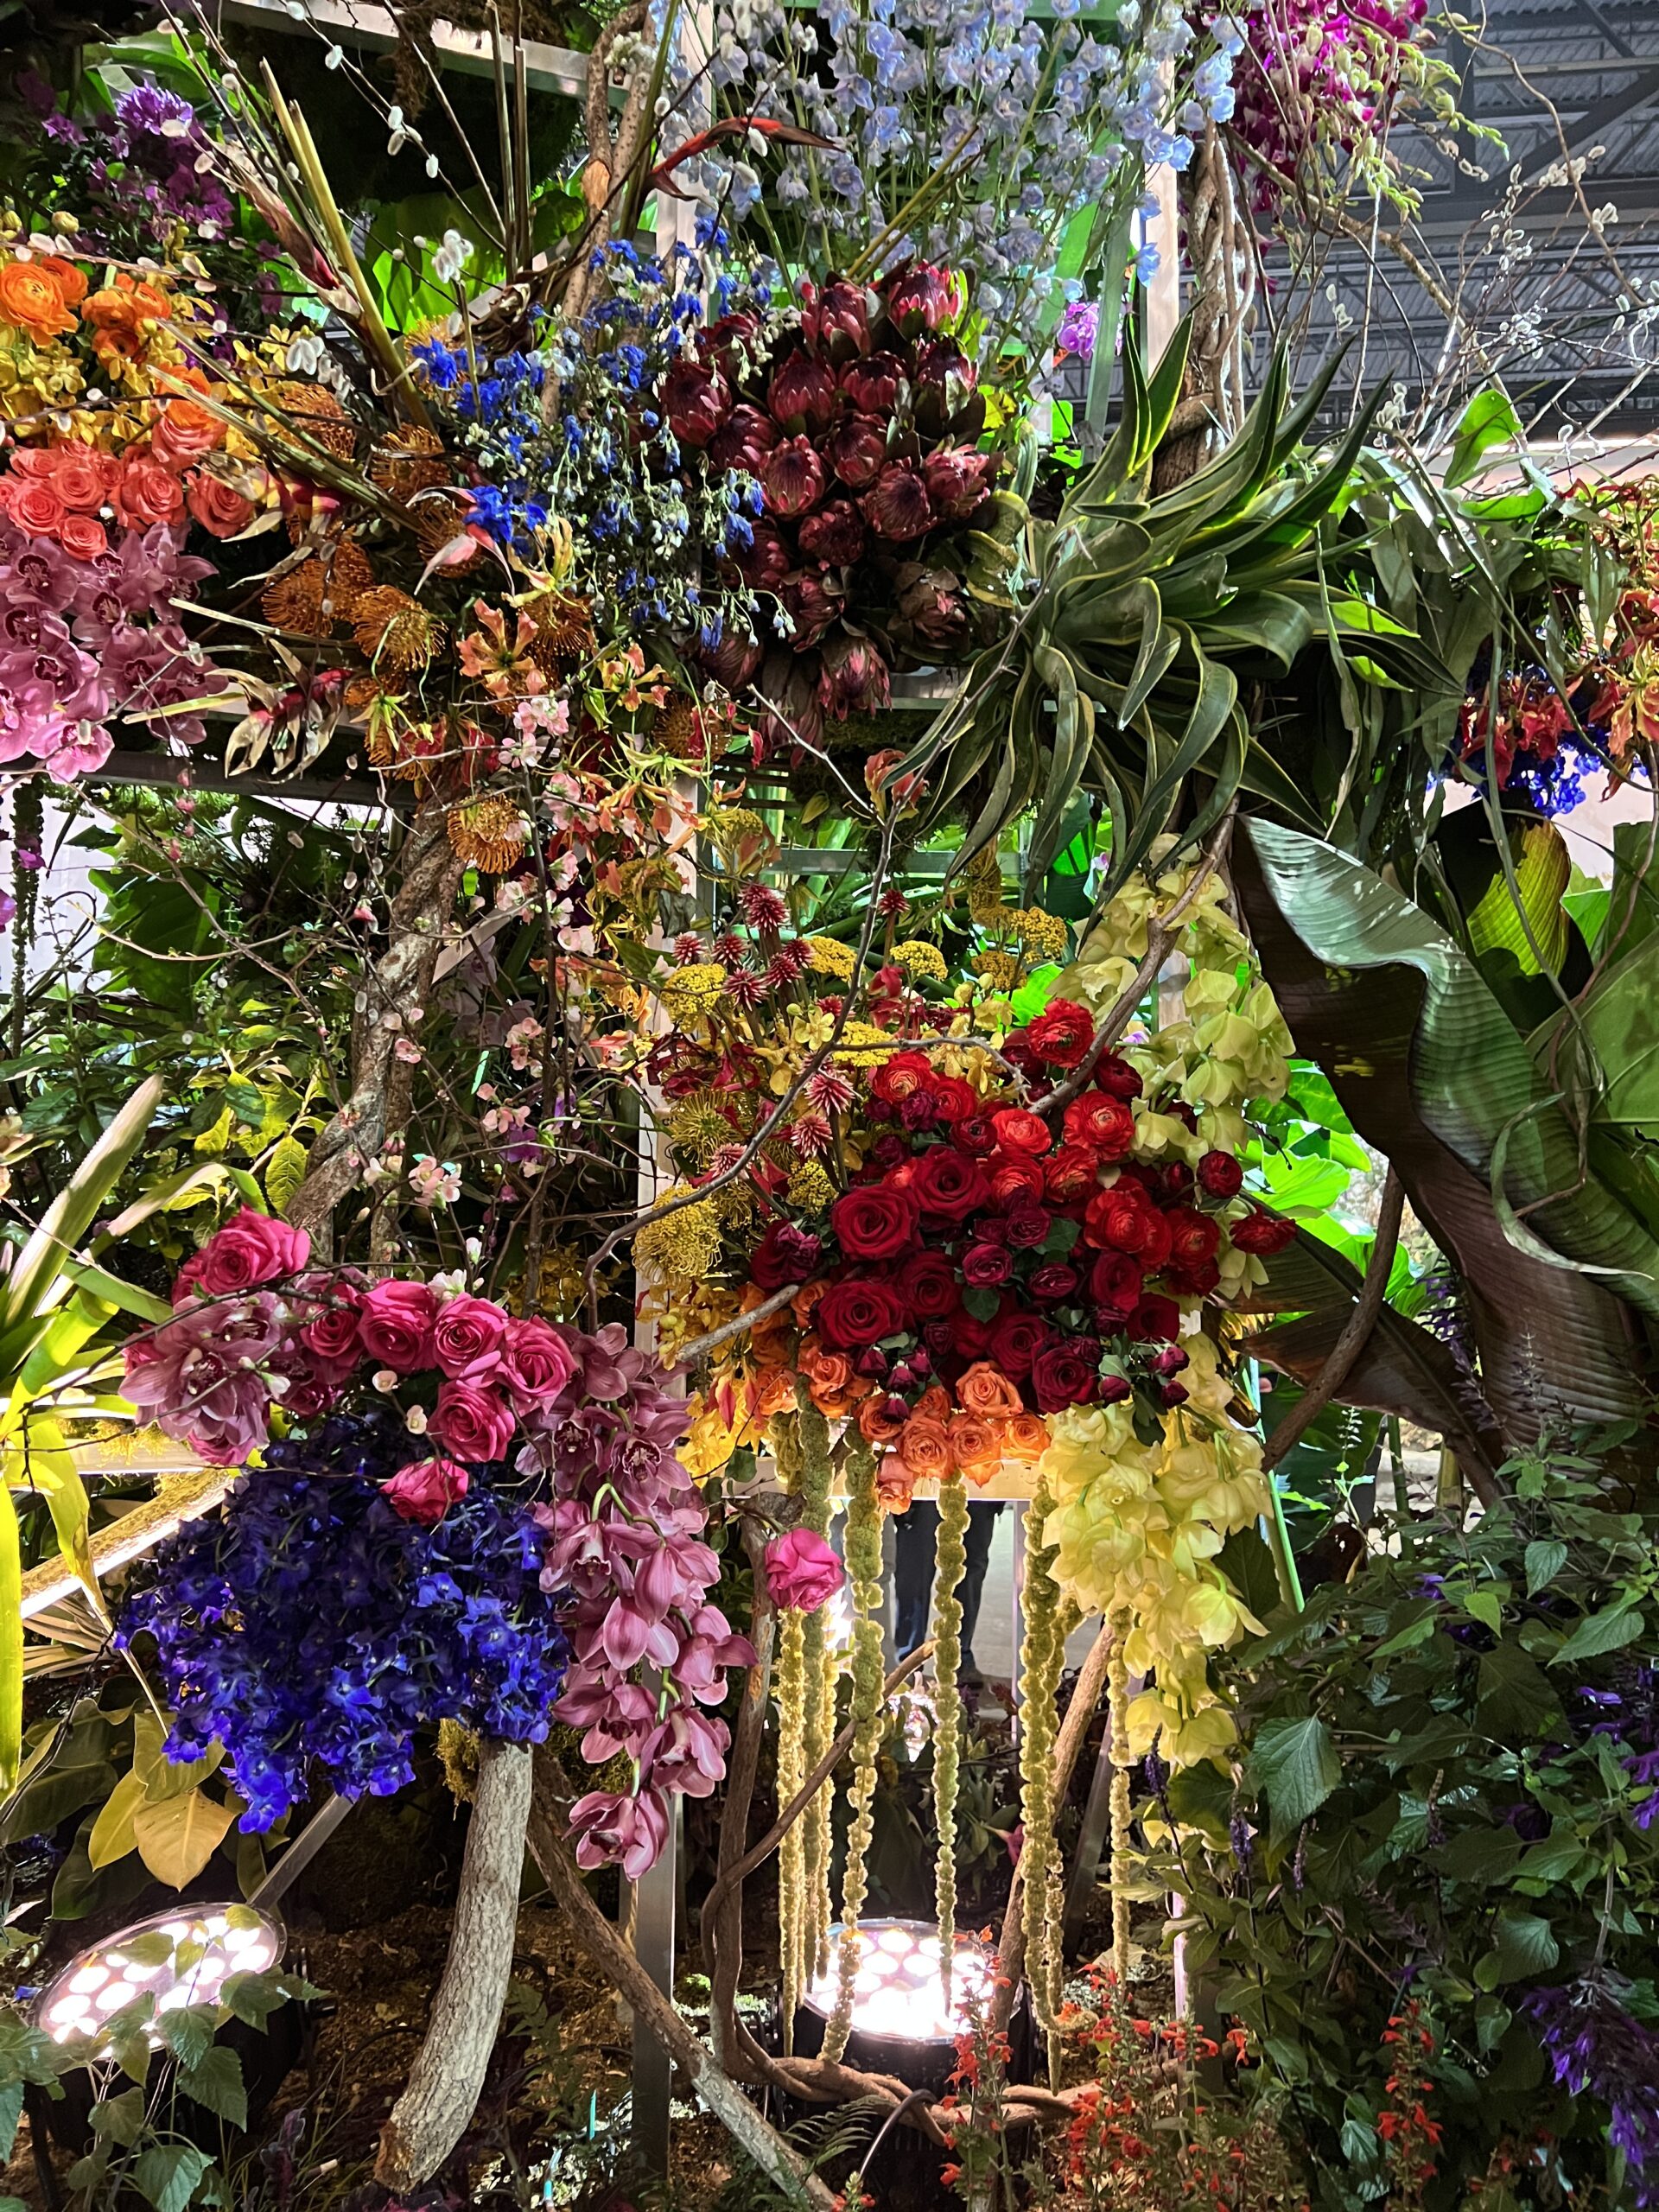 The Grand Entrance at the Philadelphia Flower Show contains 20 foot high walls of flowers